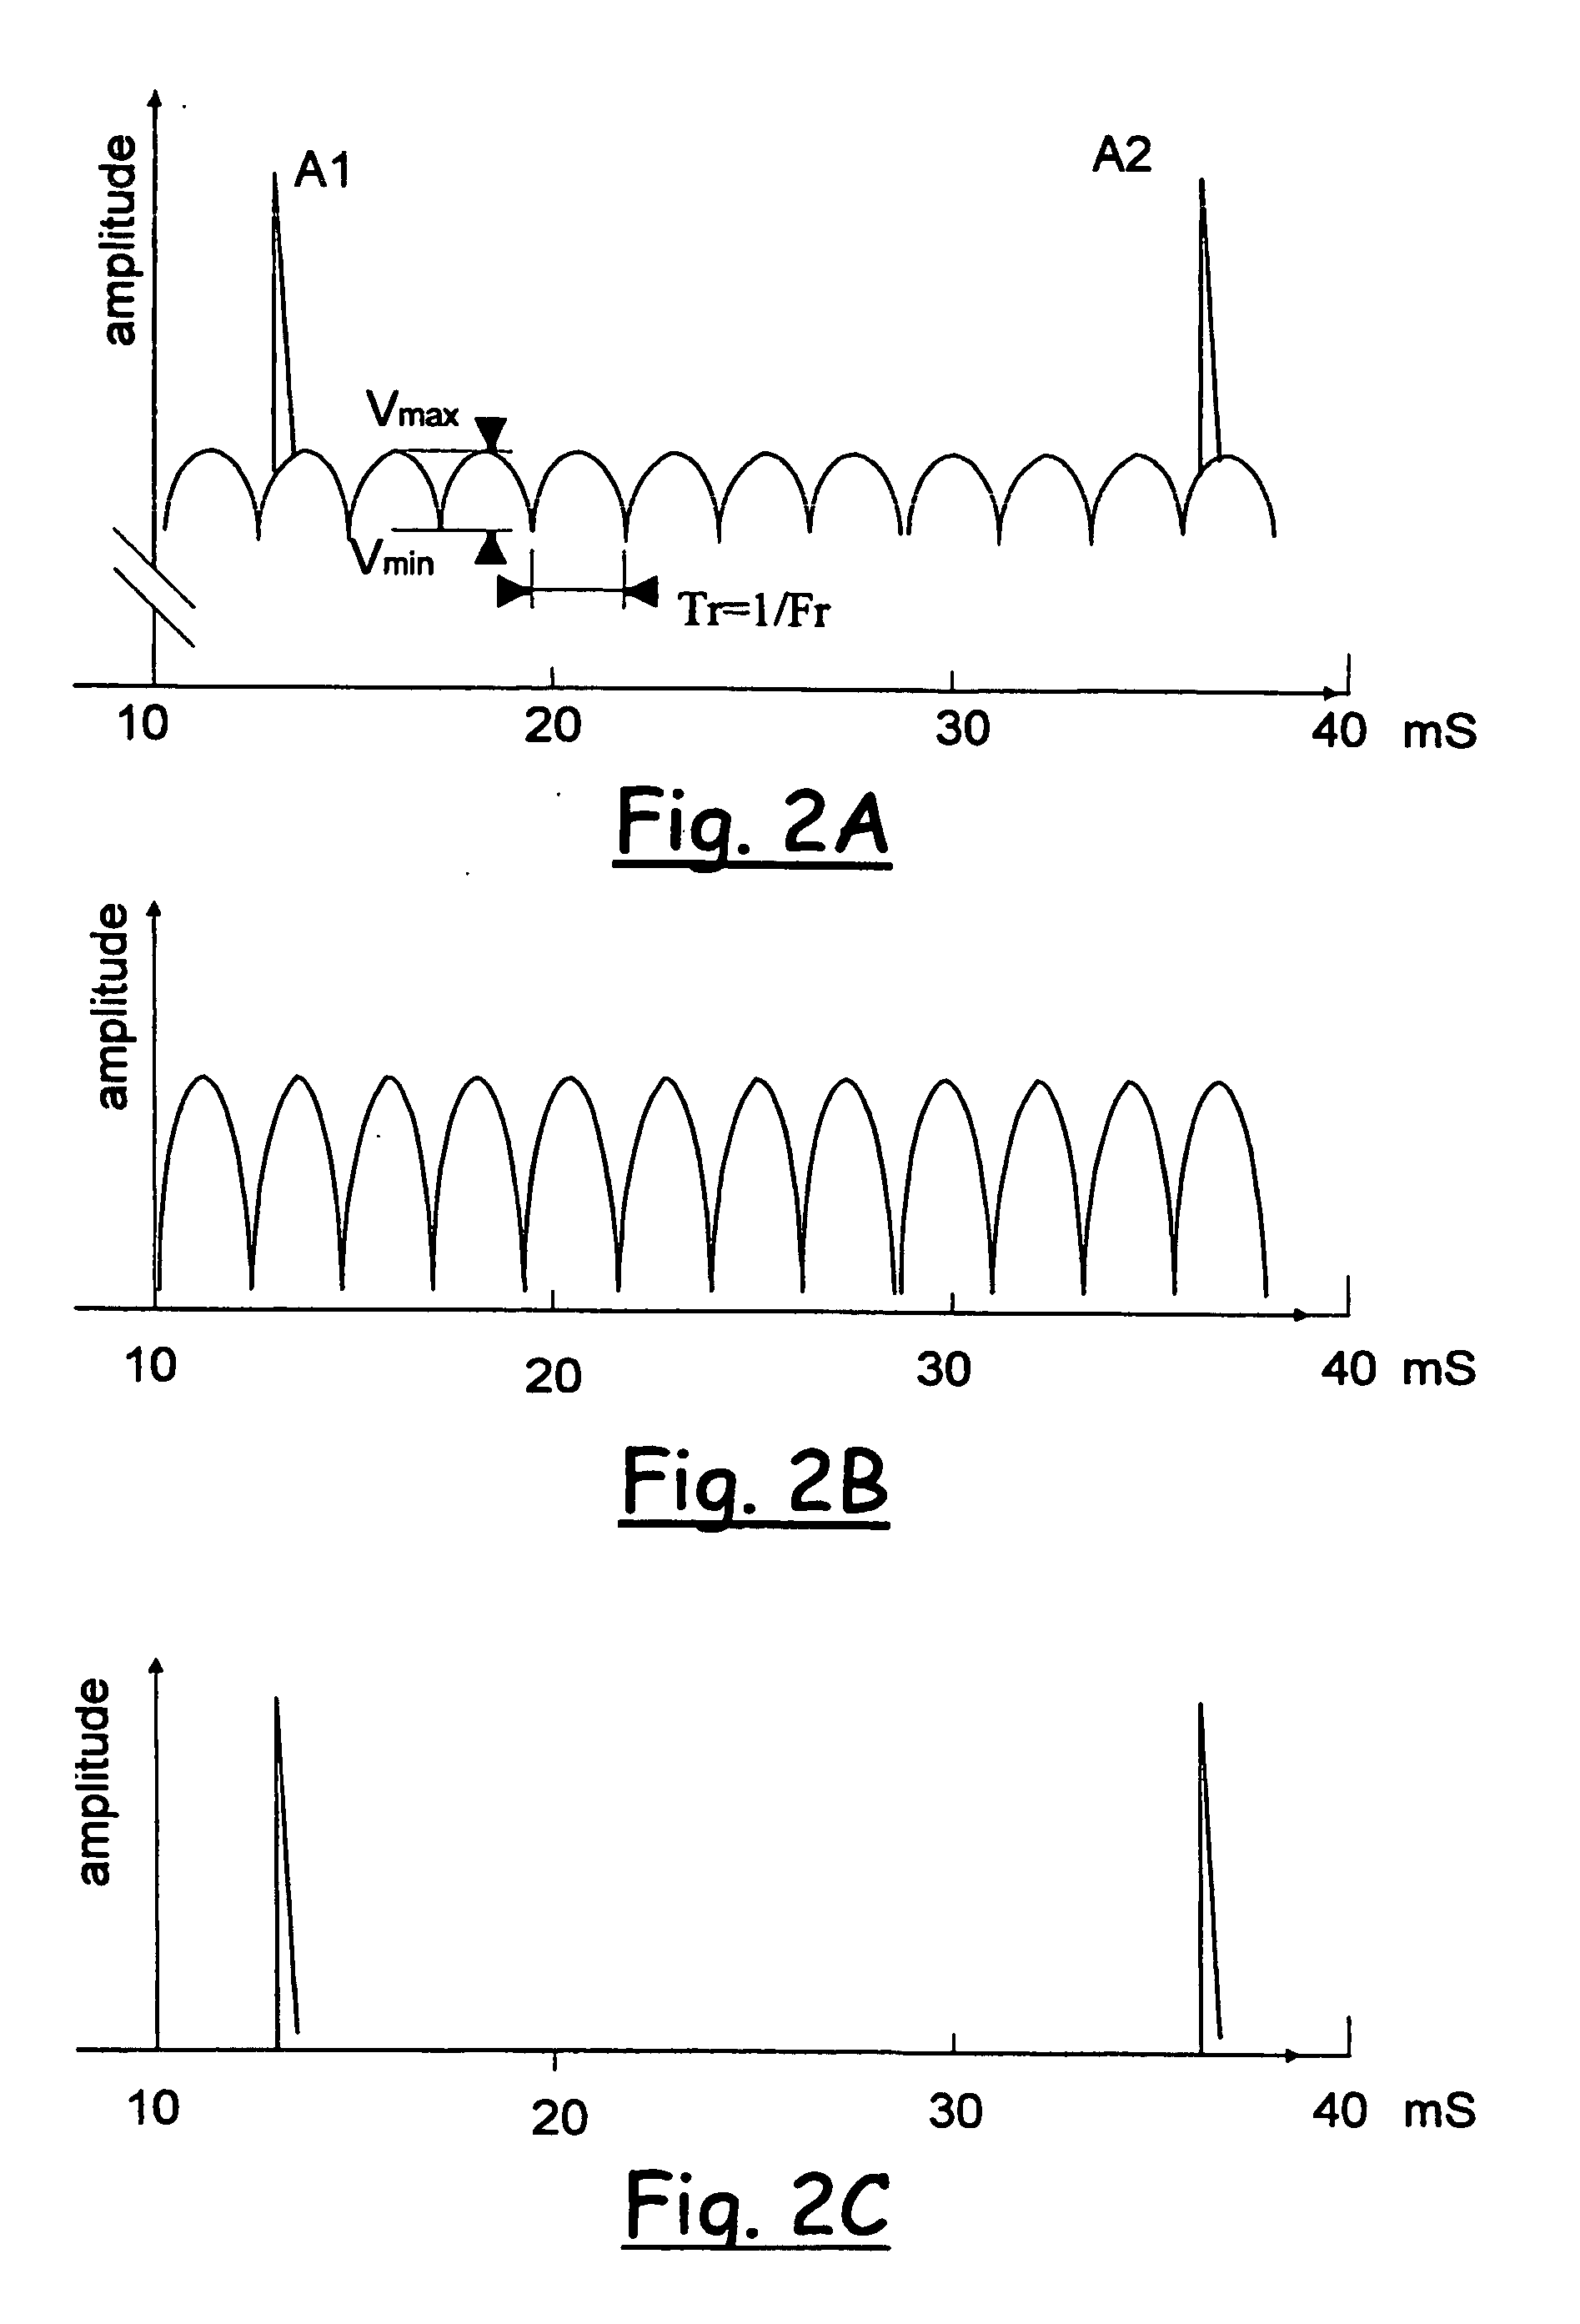 System and apparatus for vehicle electrical power analysis